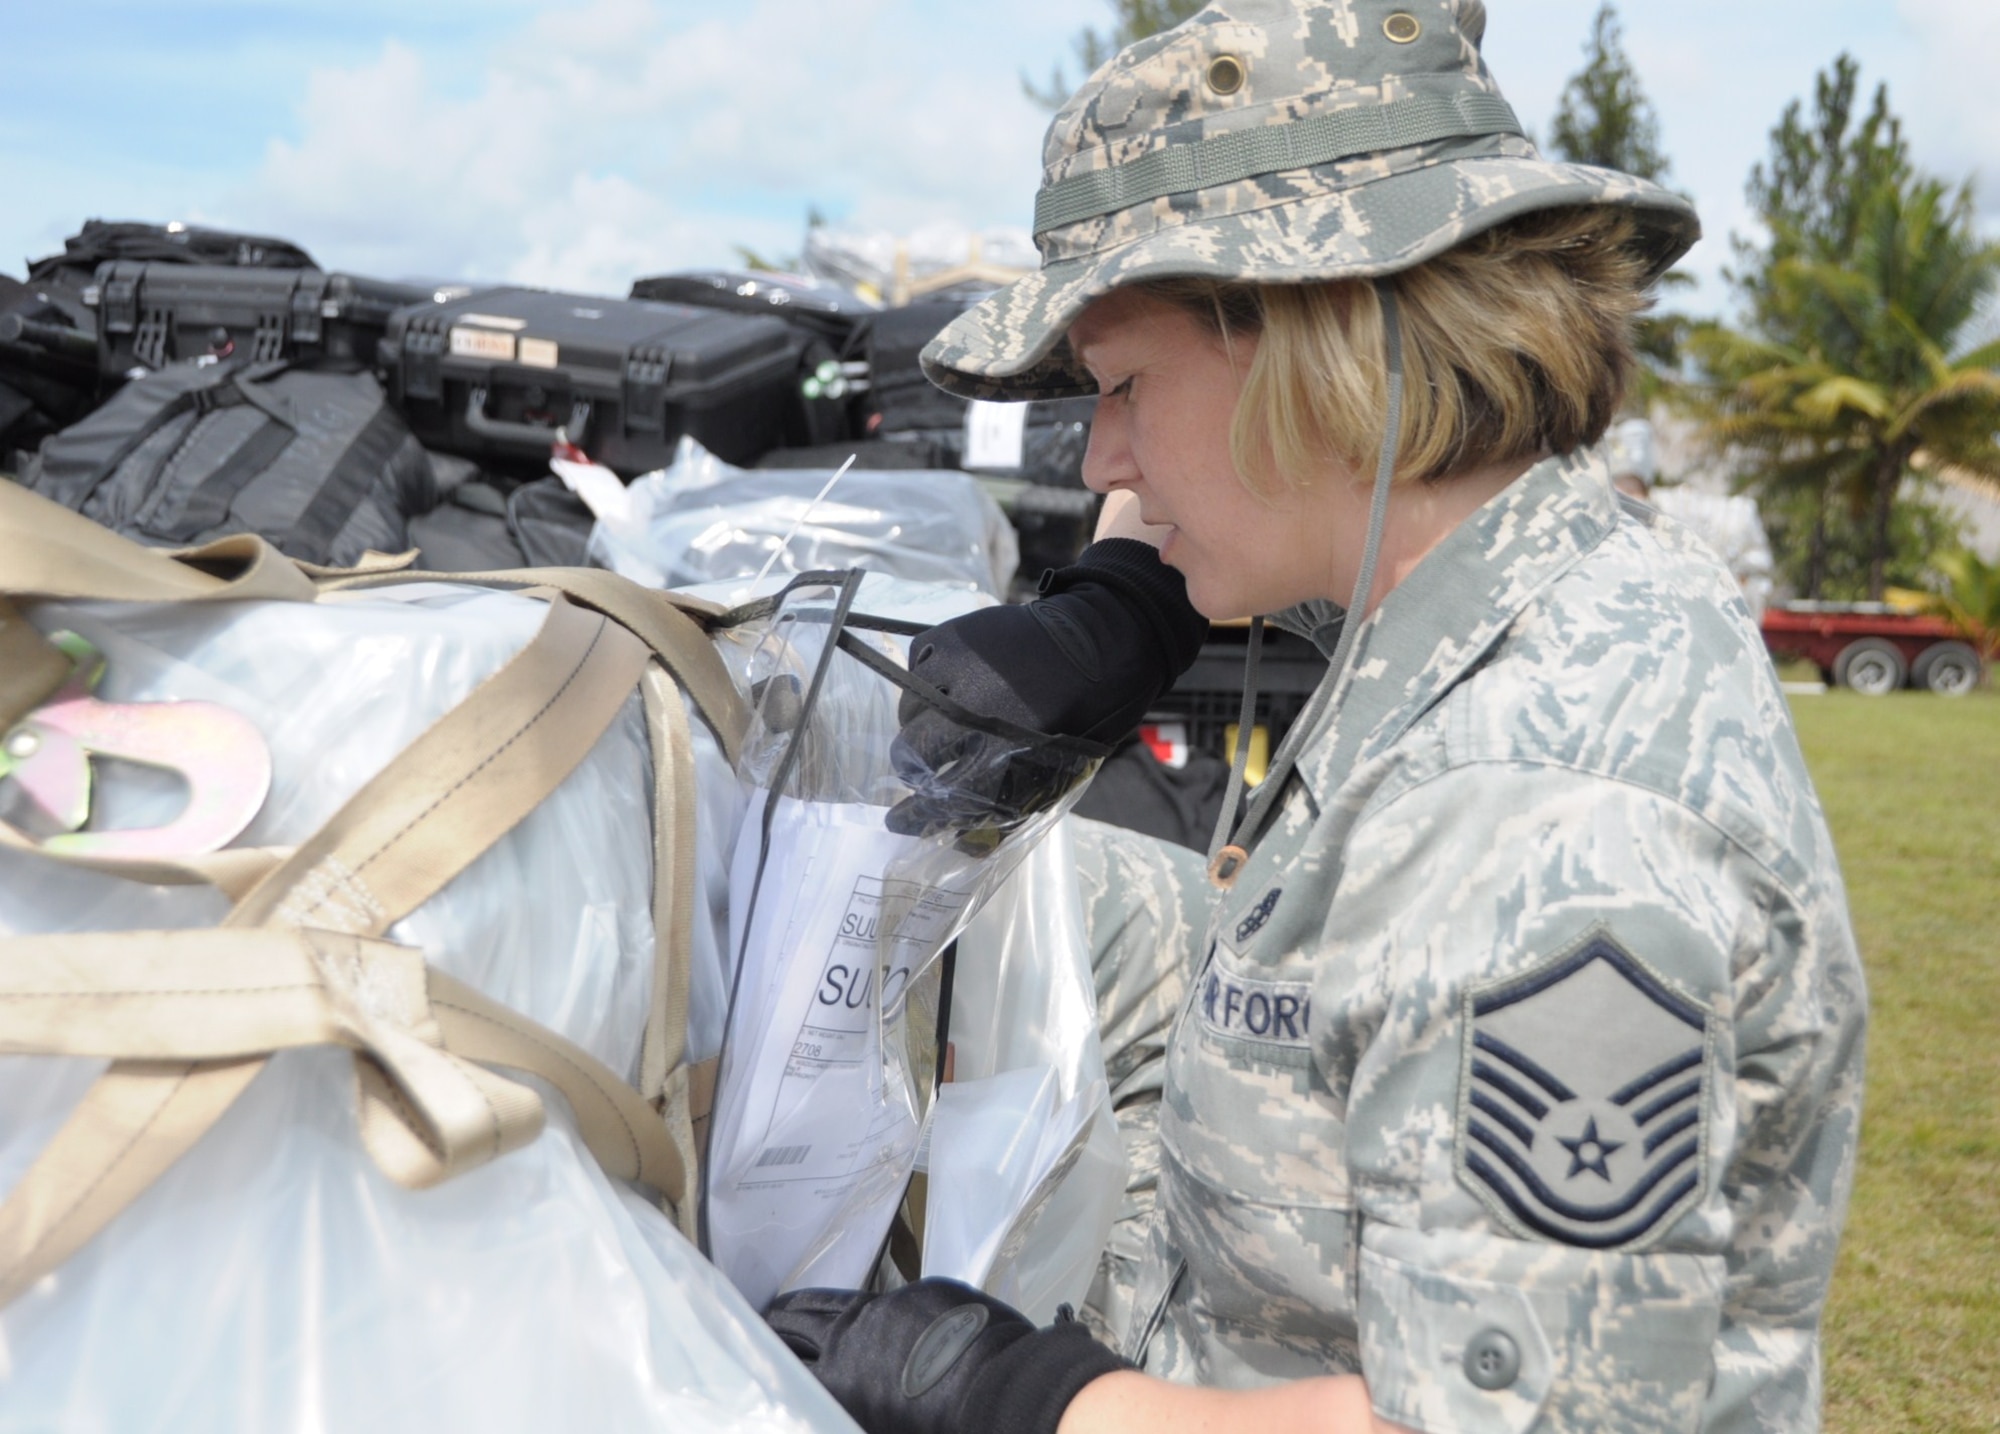 U.S. Air Force Master Sgt. Tanya Hubbard, medical technician begins to inspect the supply list on the pallets in Cumuto Barracks at Trinidad and Tobago April 8, 2011. Hubbard is a part of the Expeditionary Medical Support Health Response Team in support of the Allied Forces Humanitarian Exercise/Fuerzas Aliadas or FA HUM 2011. (U.S. Air Force photo by 2d Lt Joel Banjo-Johnson/Released)
